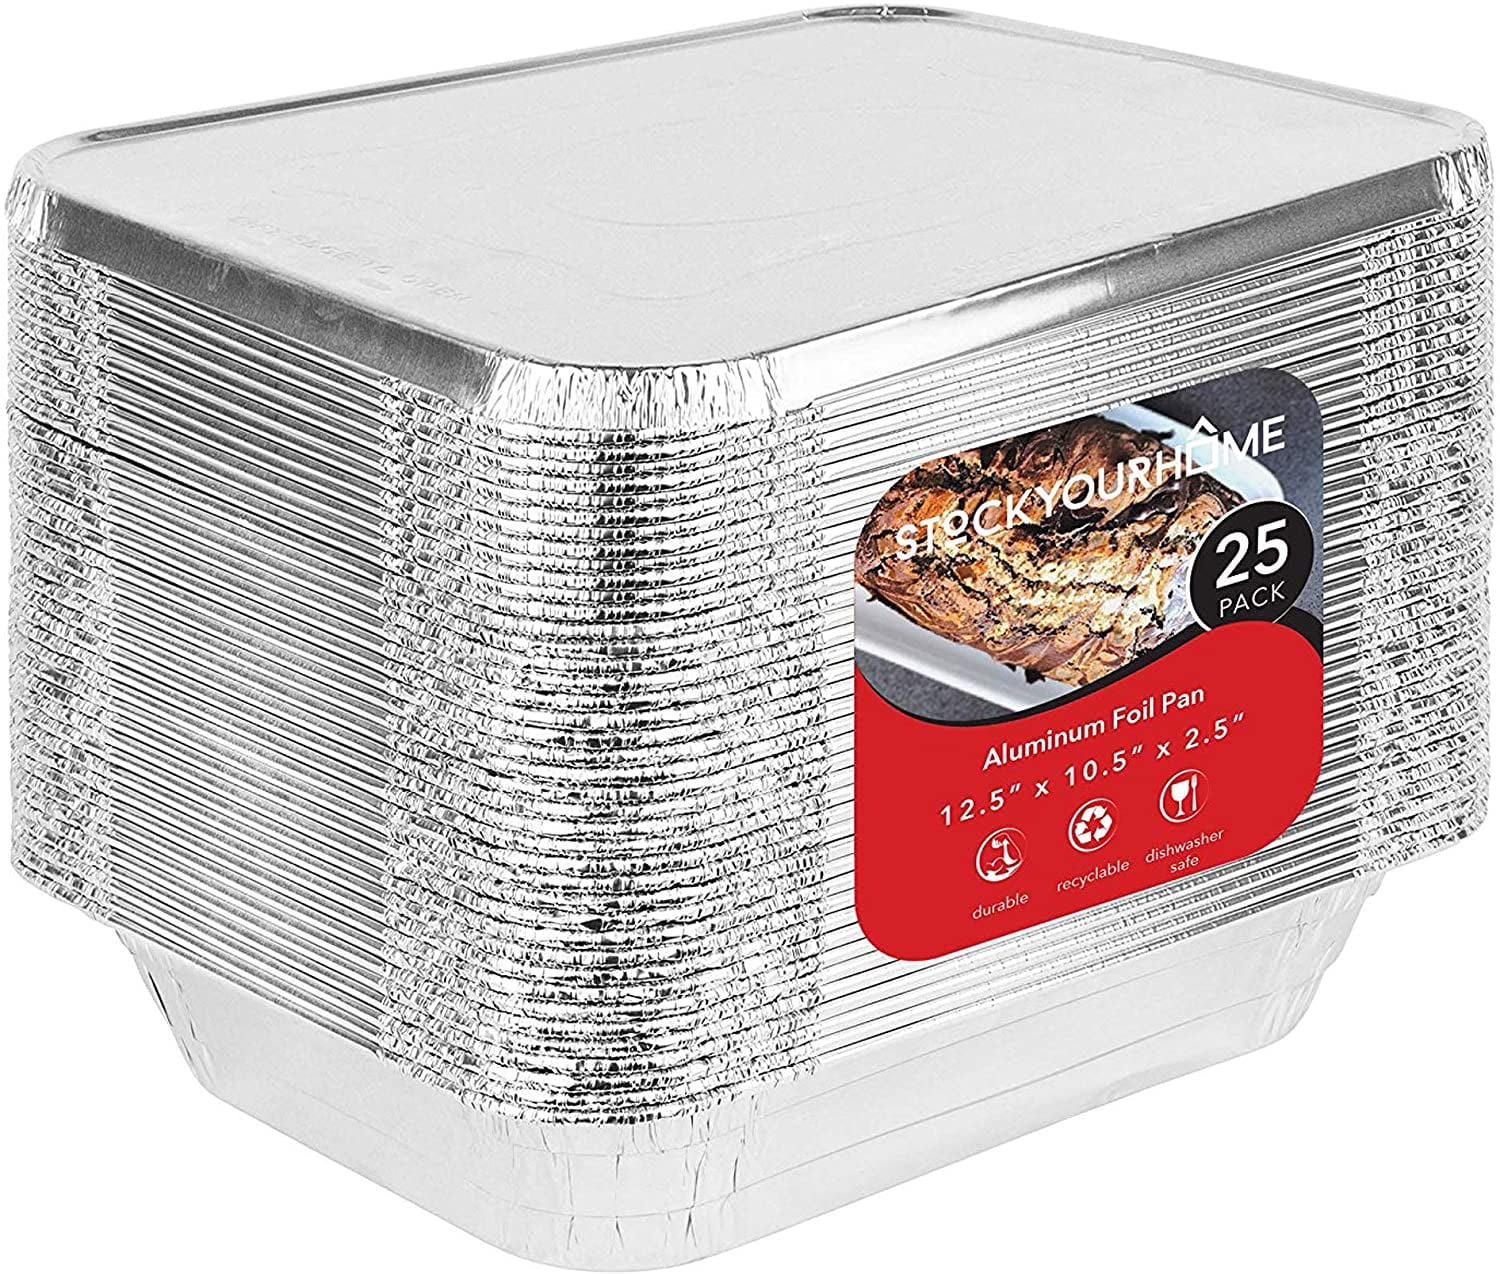 For Takeouts Baking Meats Cooking Accessory Cakes Pies Broiling Oven Party Bargains 10 Pack Catering Aluminum Foil Lids for 9 x 13 Inches pans For Steam Table 